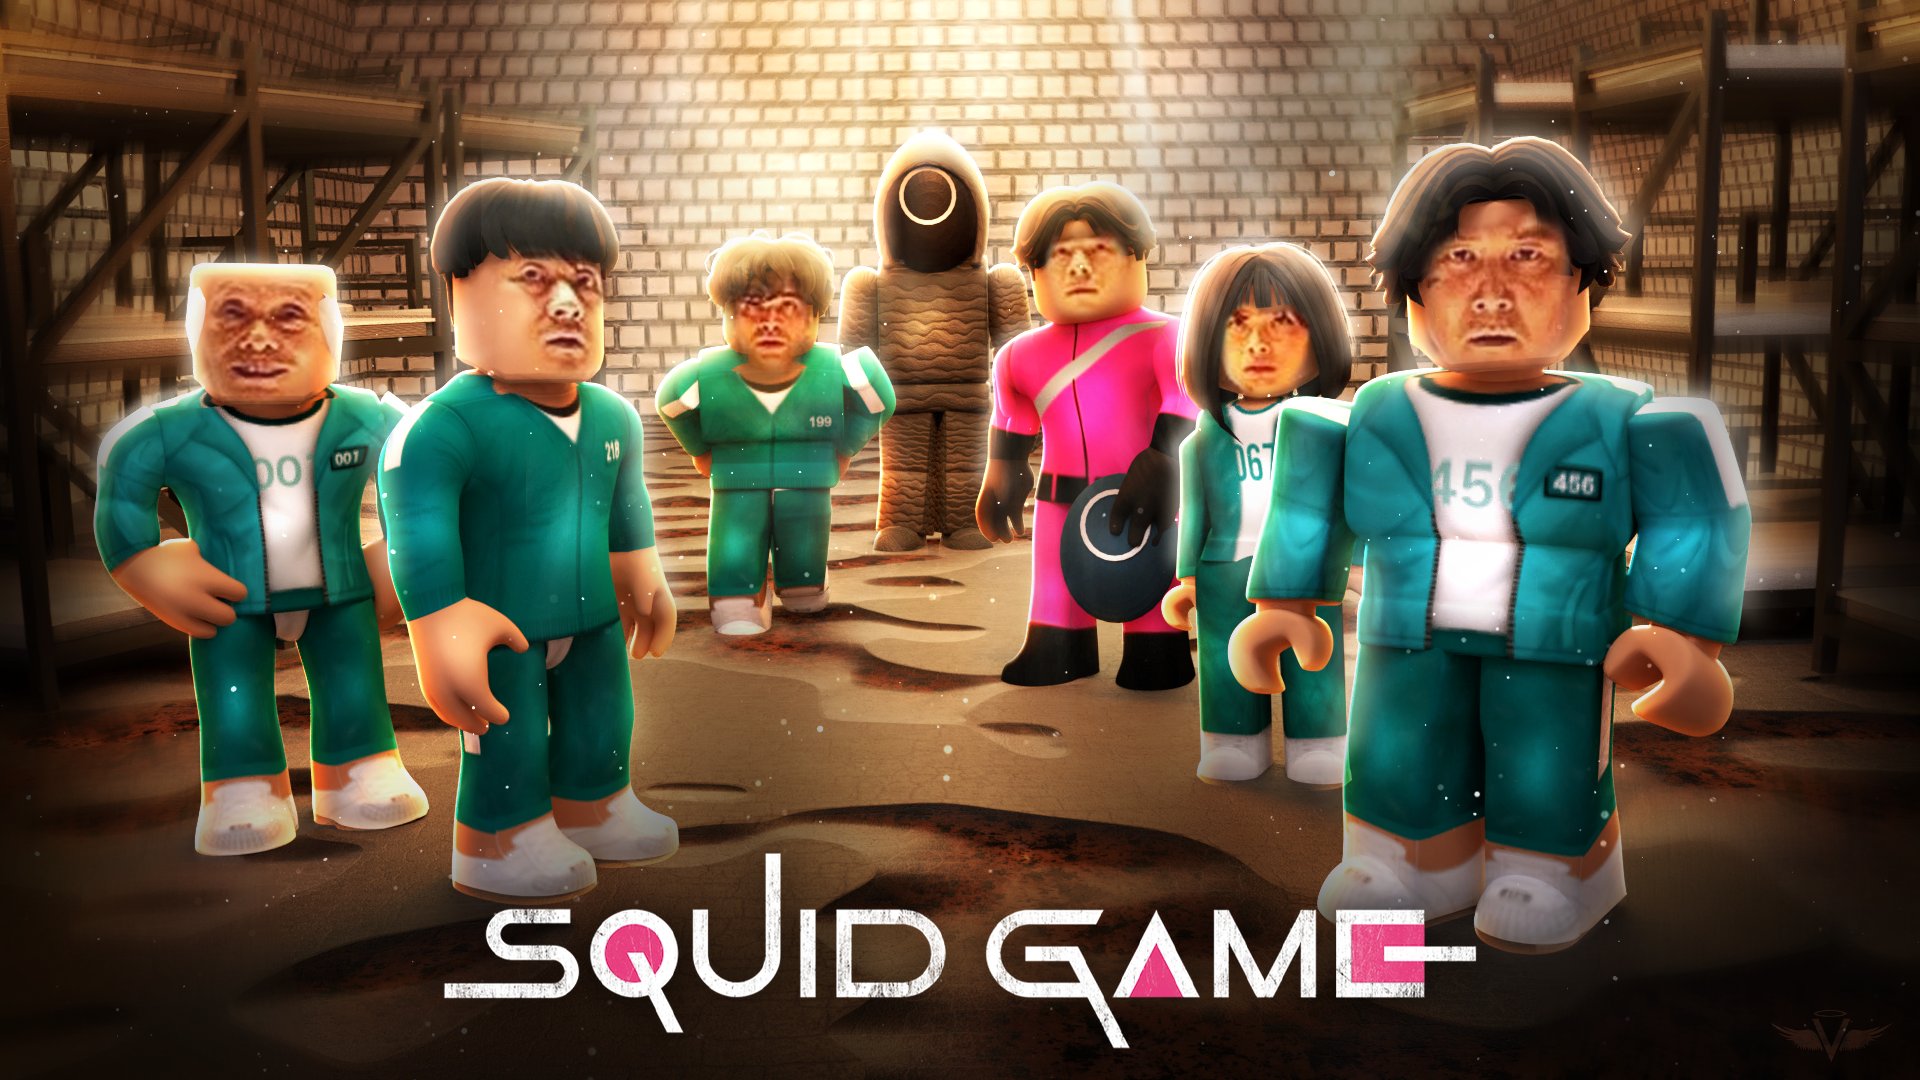 Squid Roblox Game for Android - Download